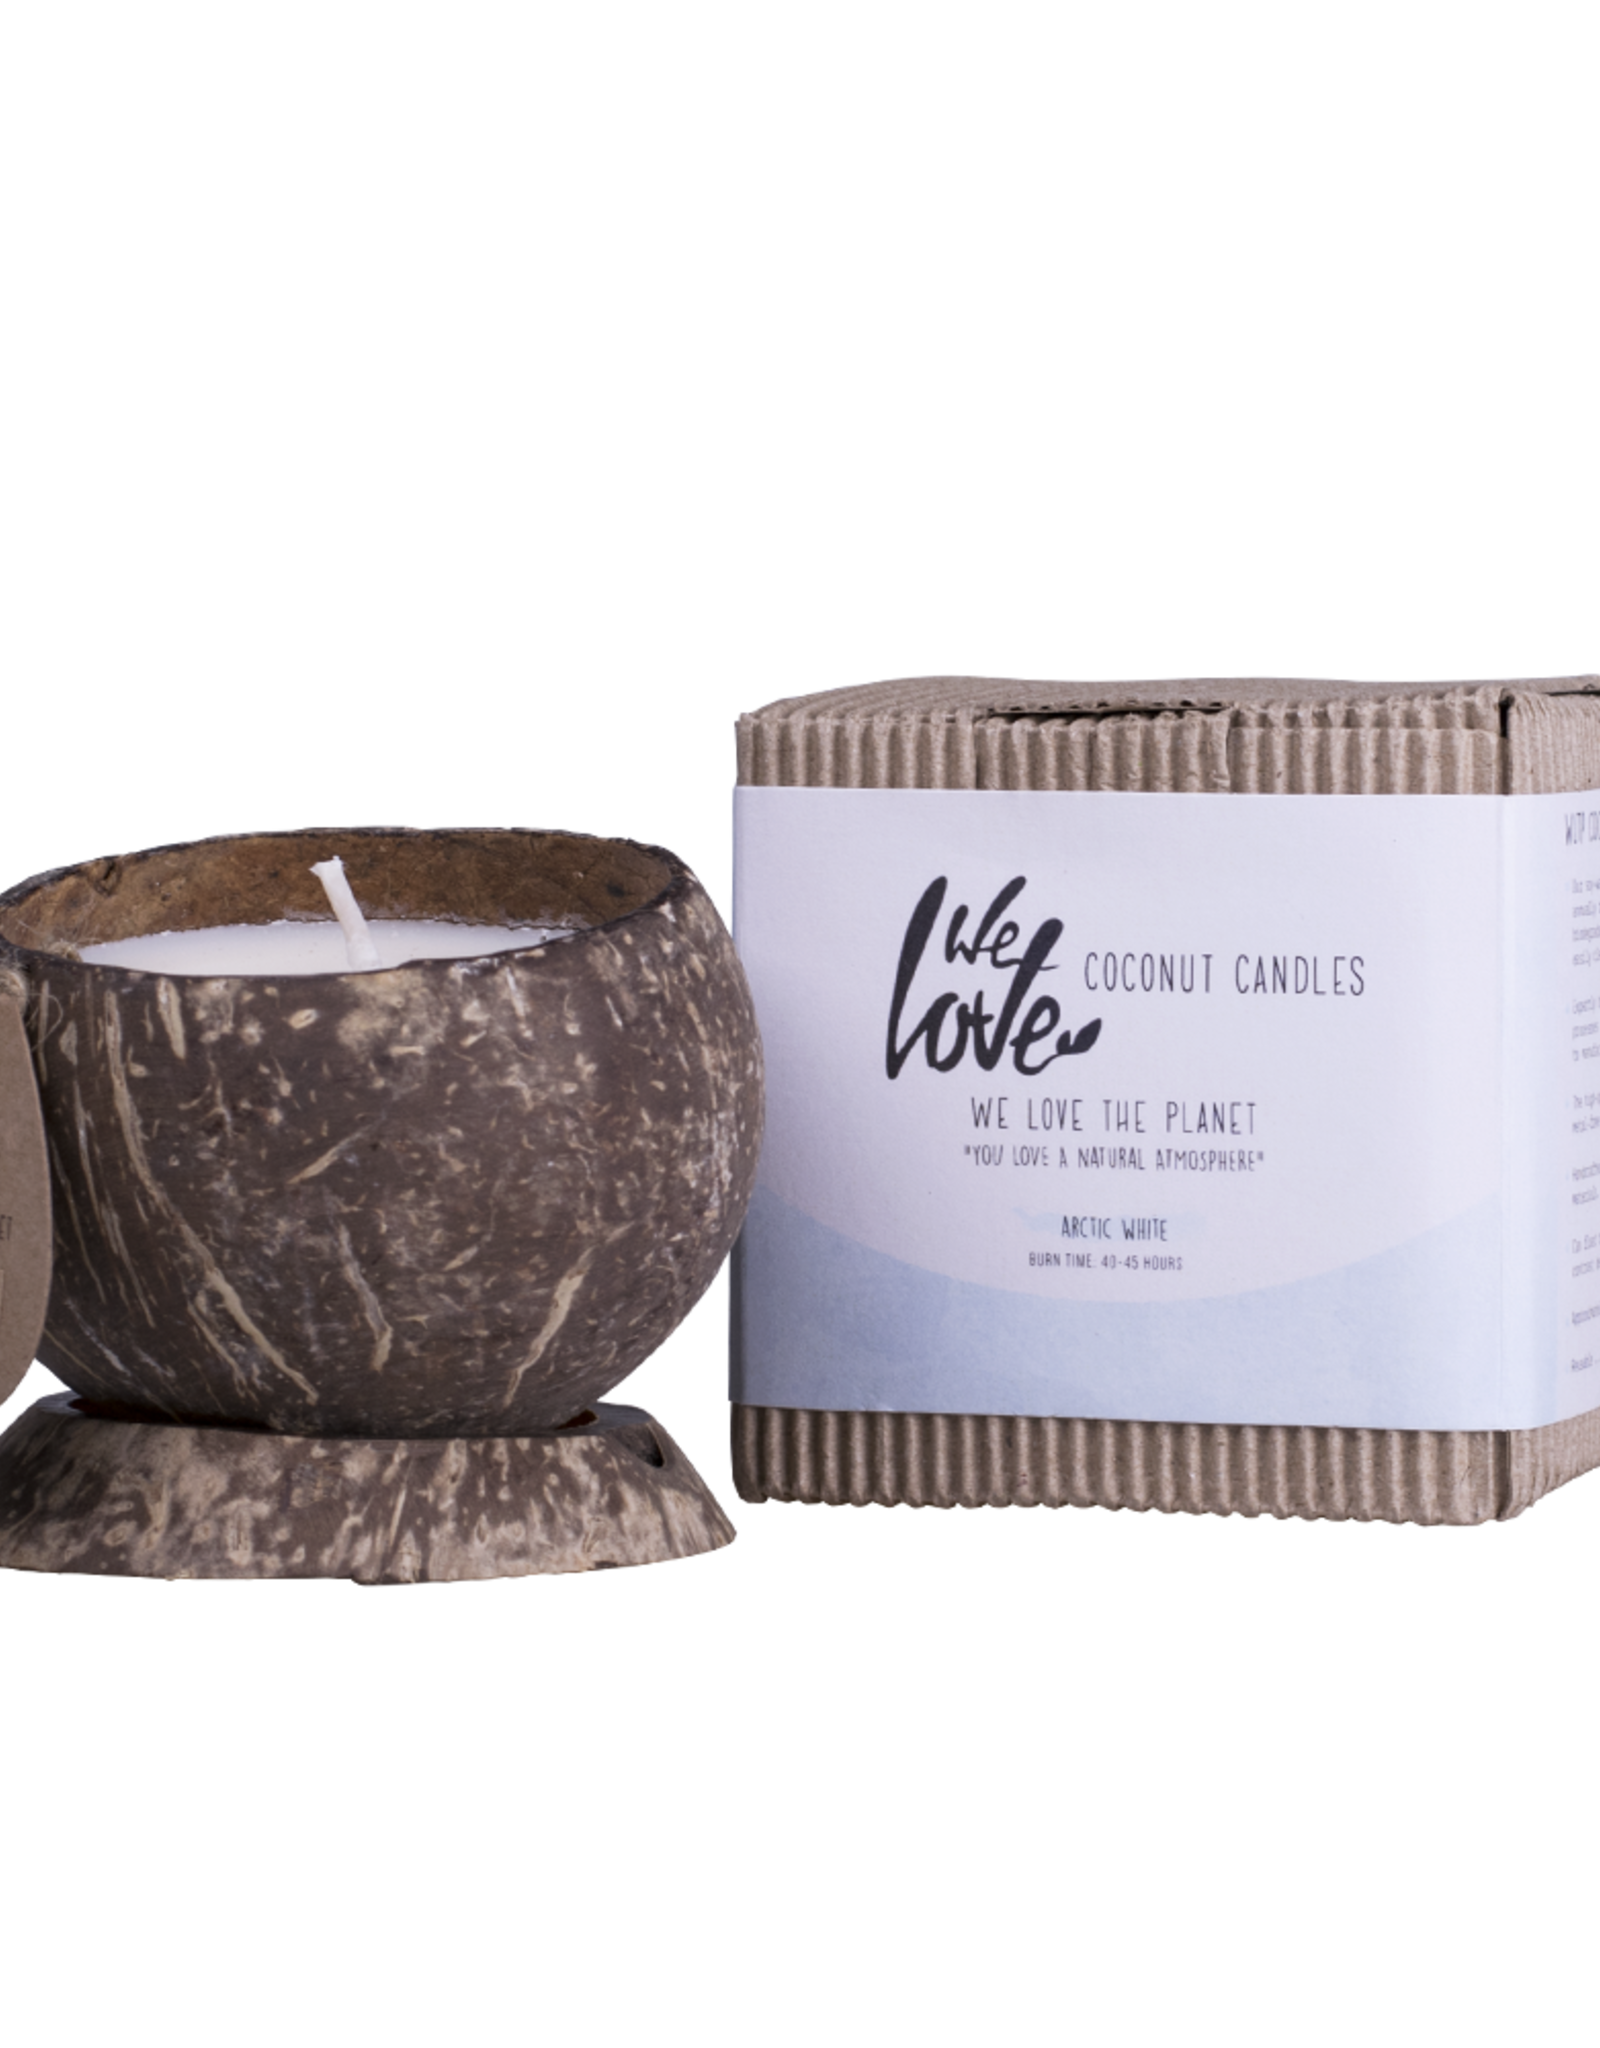 We love the planet We Love The Planet Soya Wax Candle Coconut candle Arctic White (New)